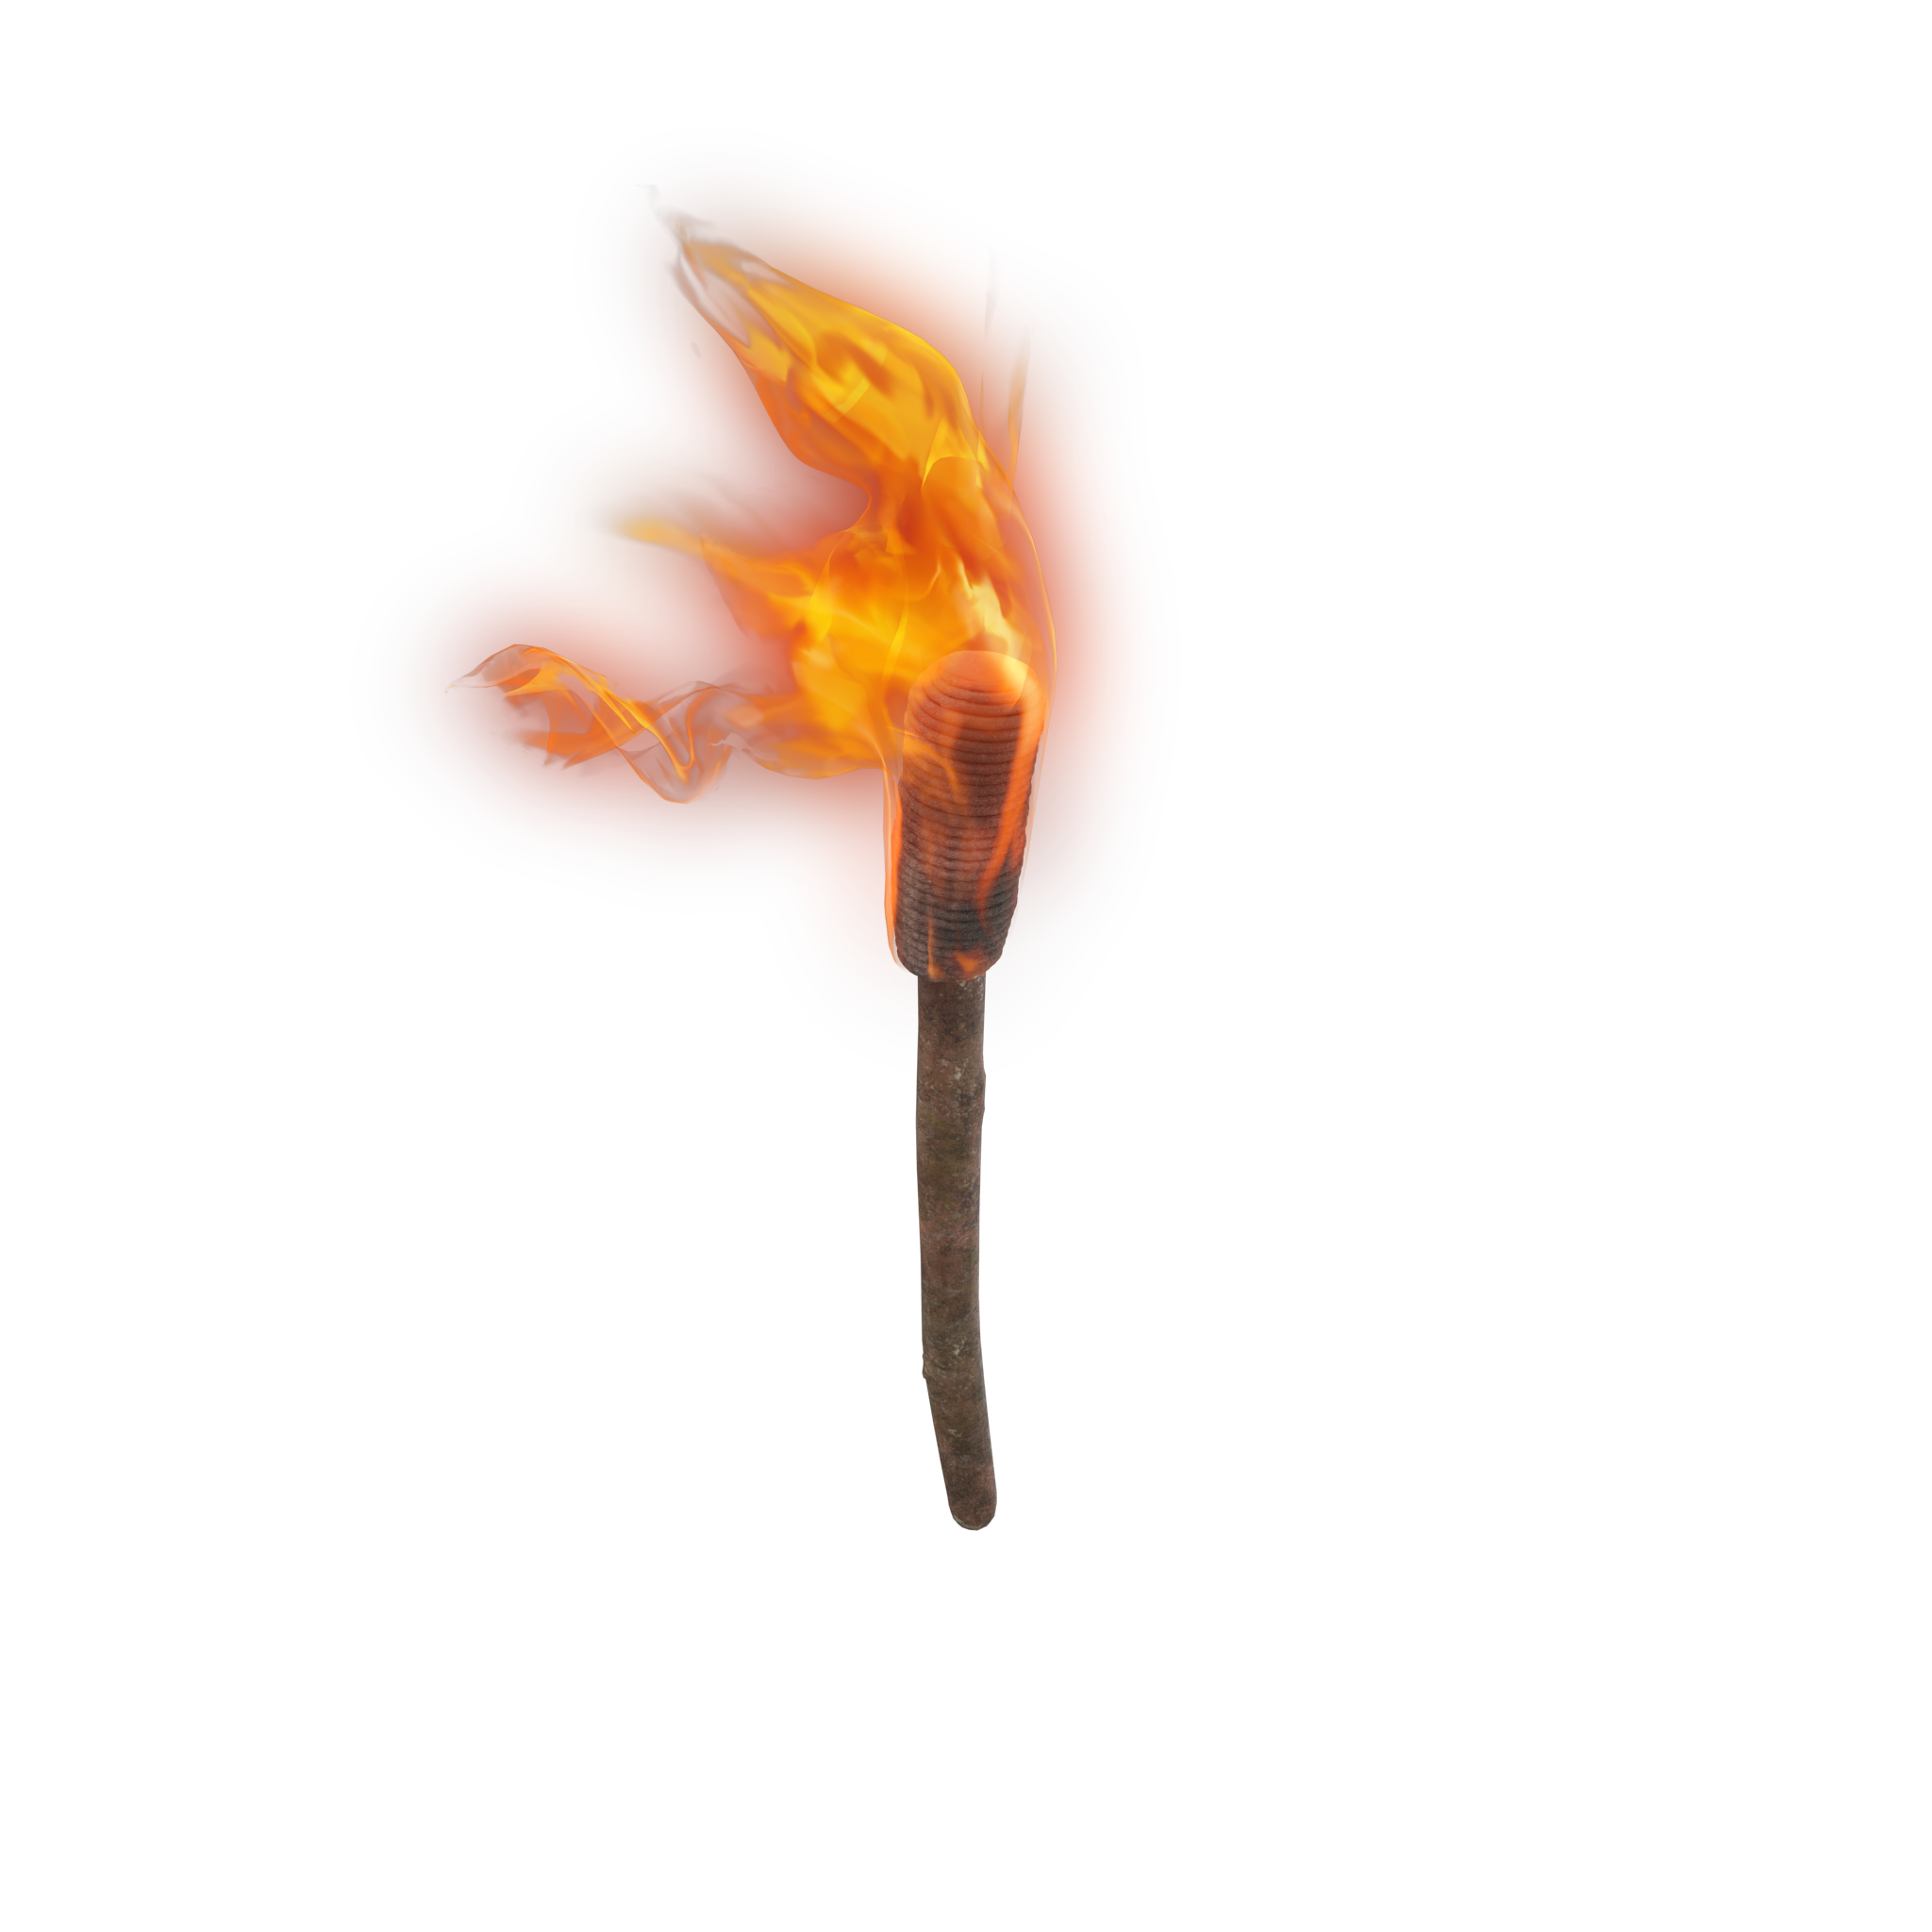 torch clipart medieval